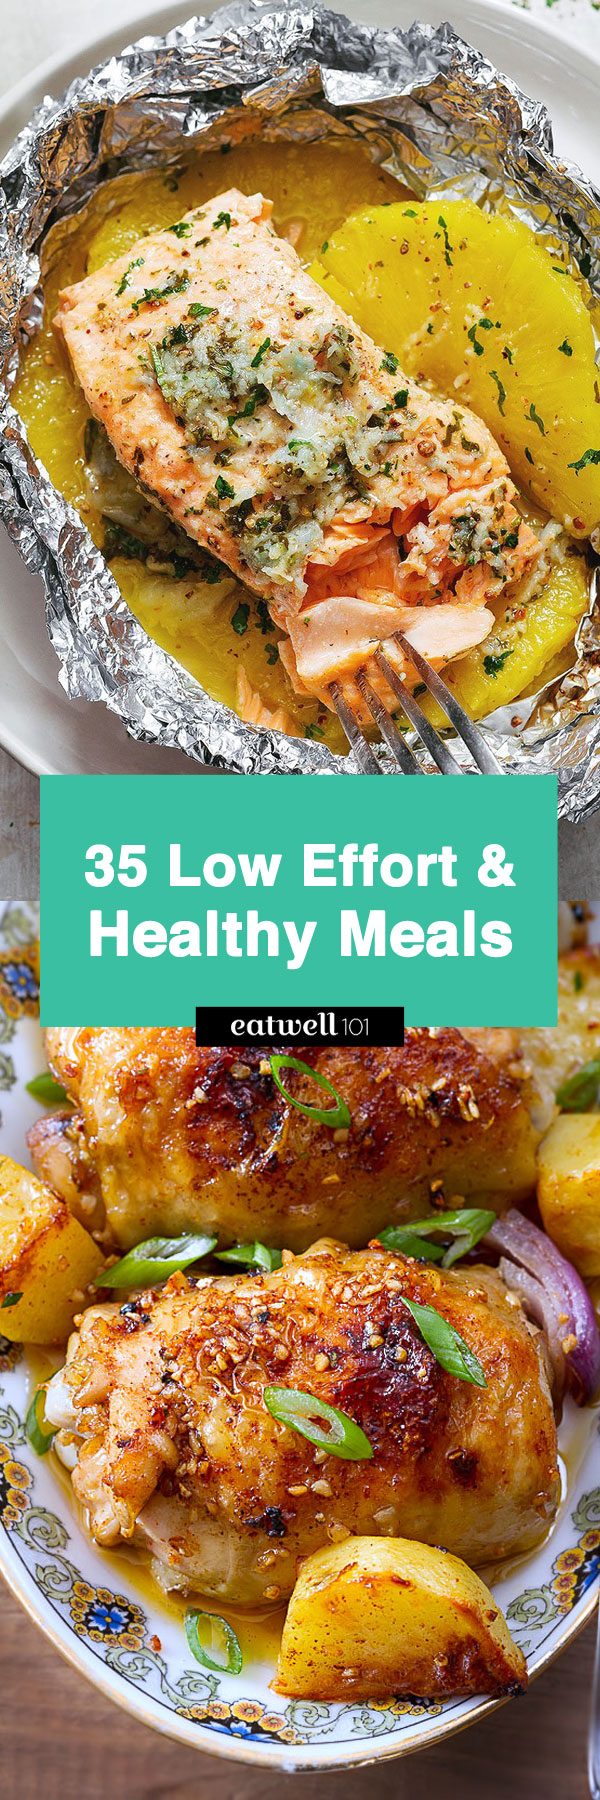 Easy Healthy Dinner Ideas 48 Low Effort And Healthy Dinner Recipes Eatwell101